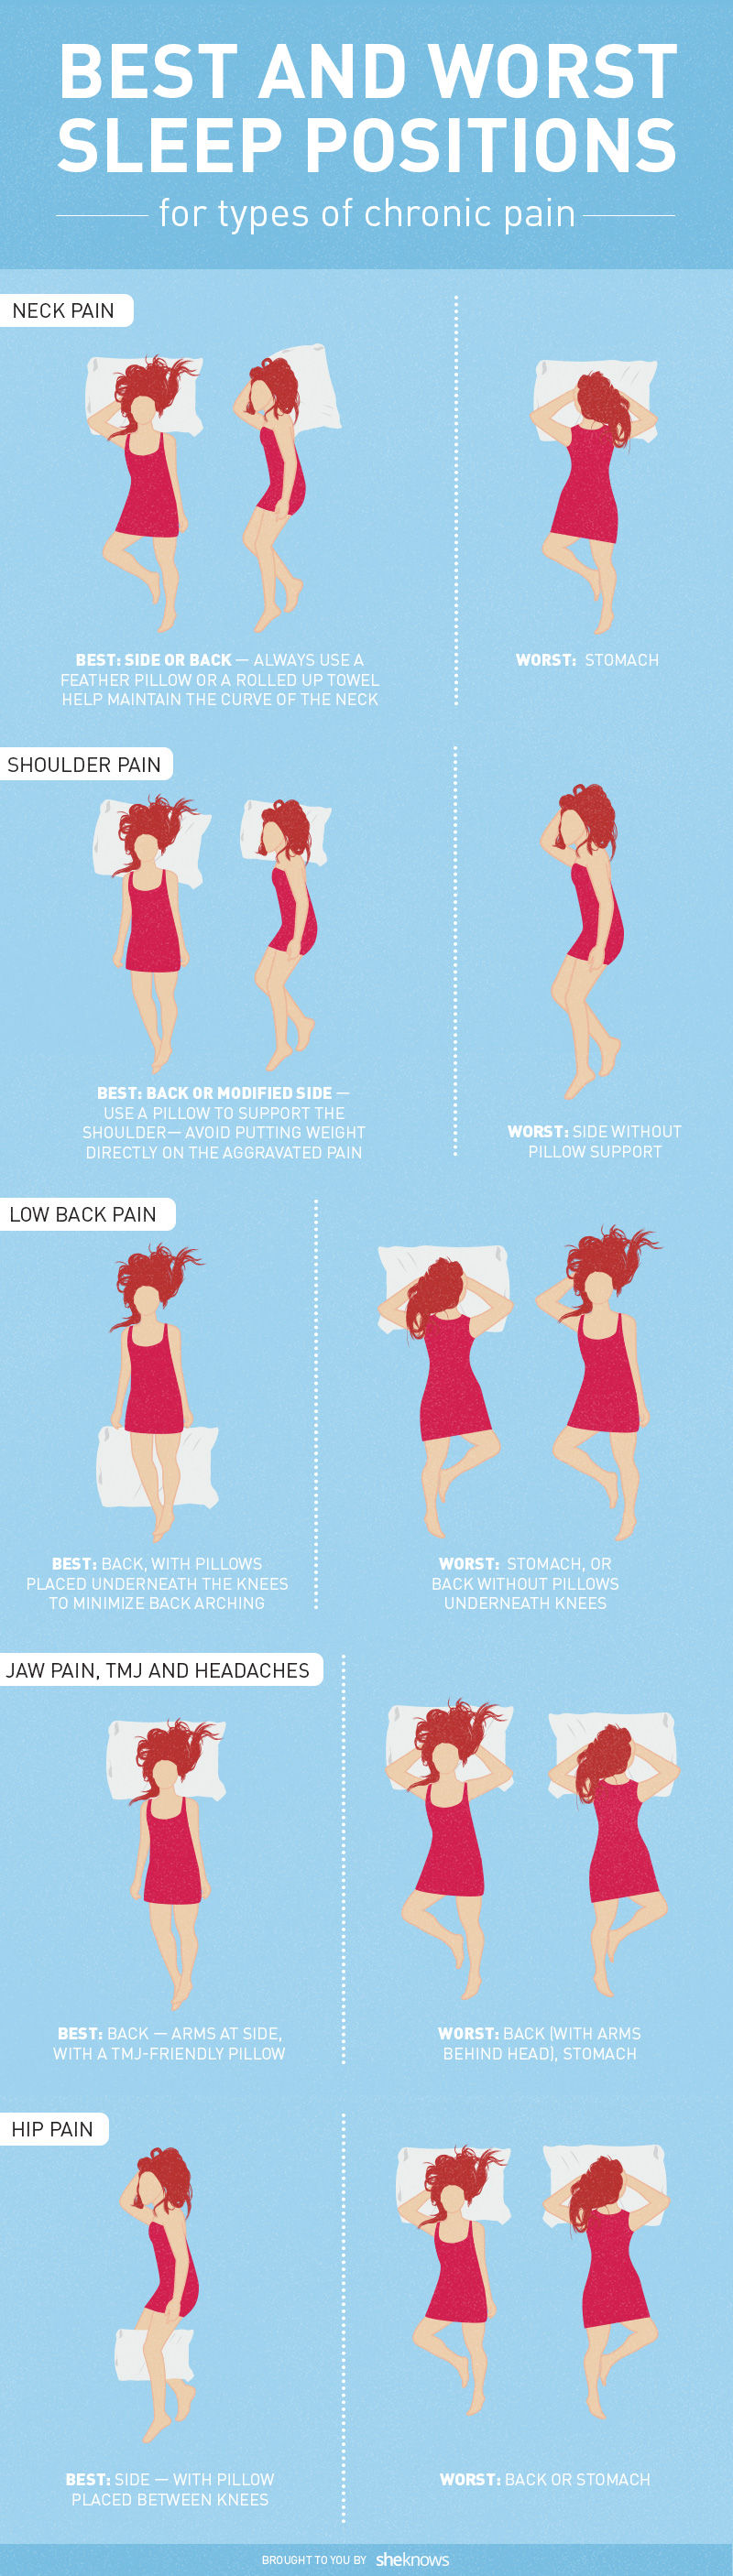 The best and worst sleeping positions for chronic pain